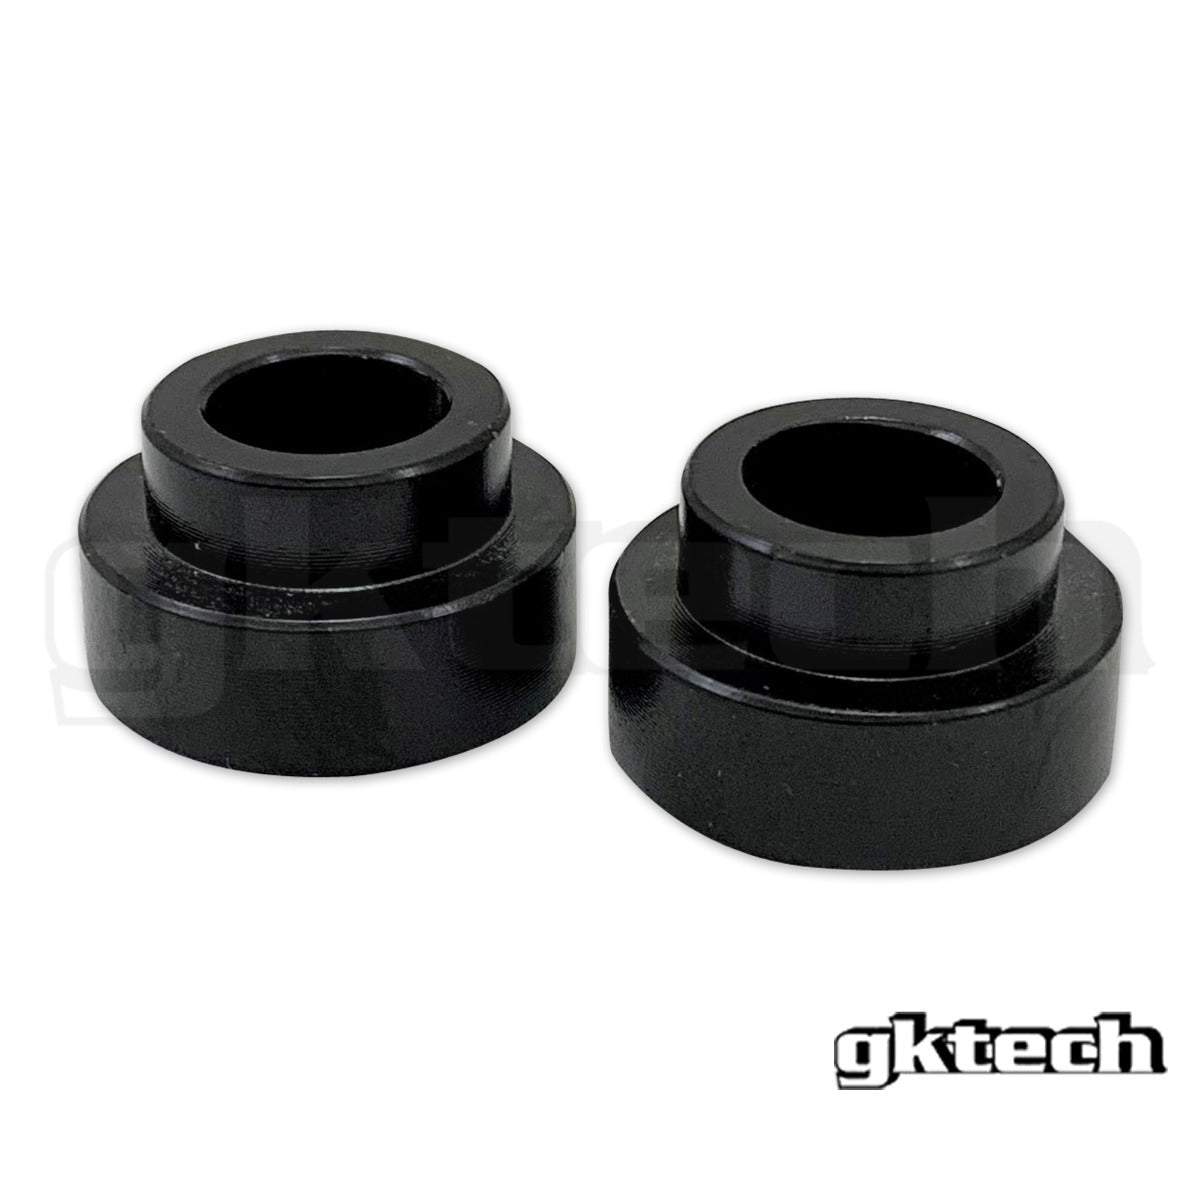 40mm rose joint spacers (pair)